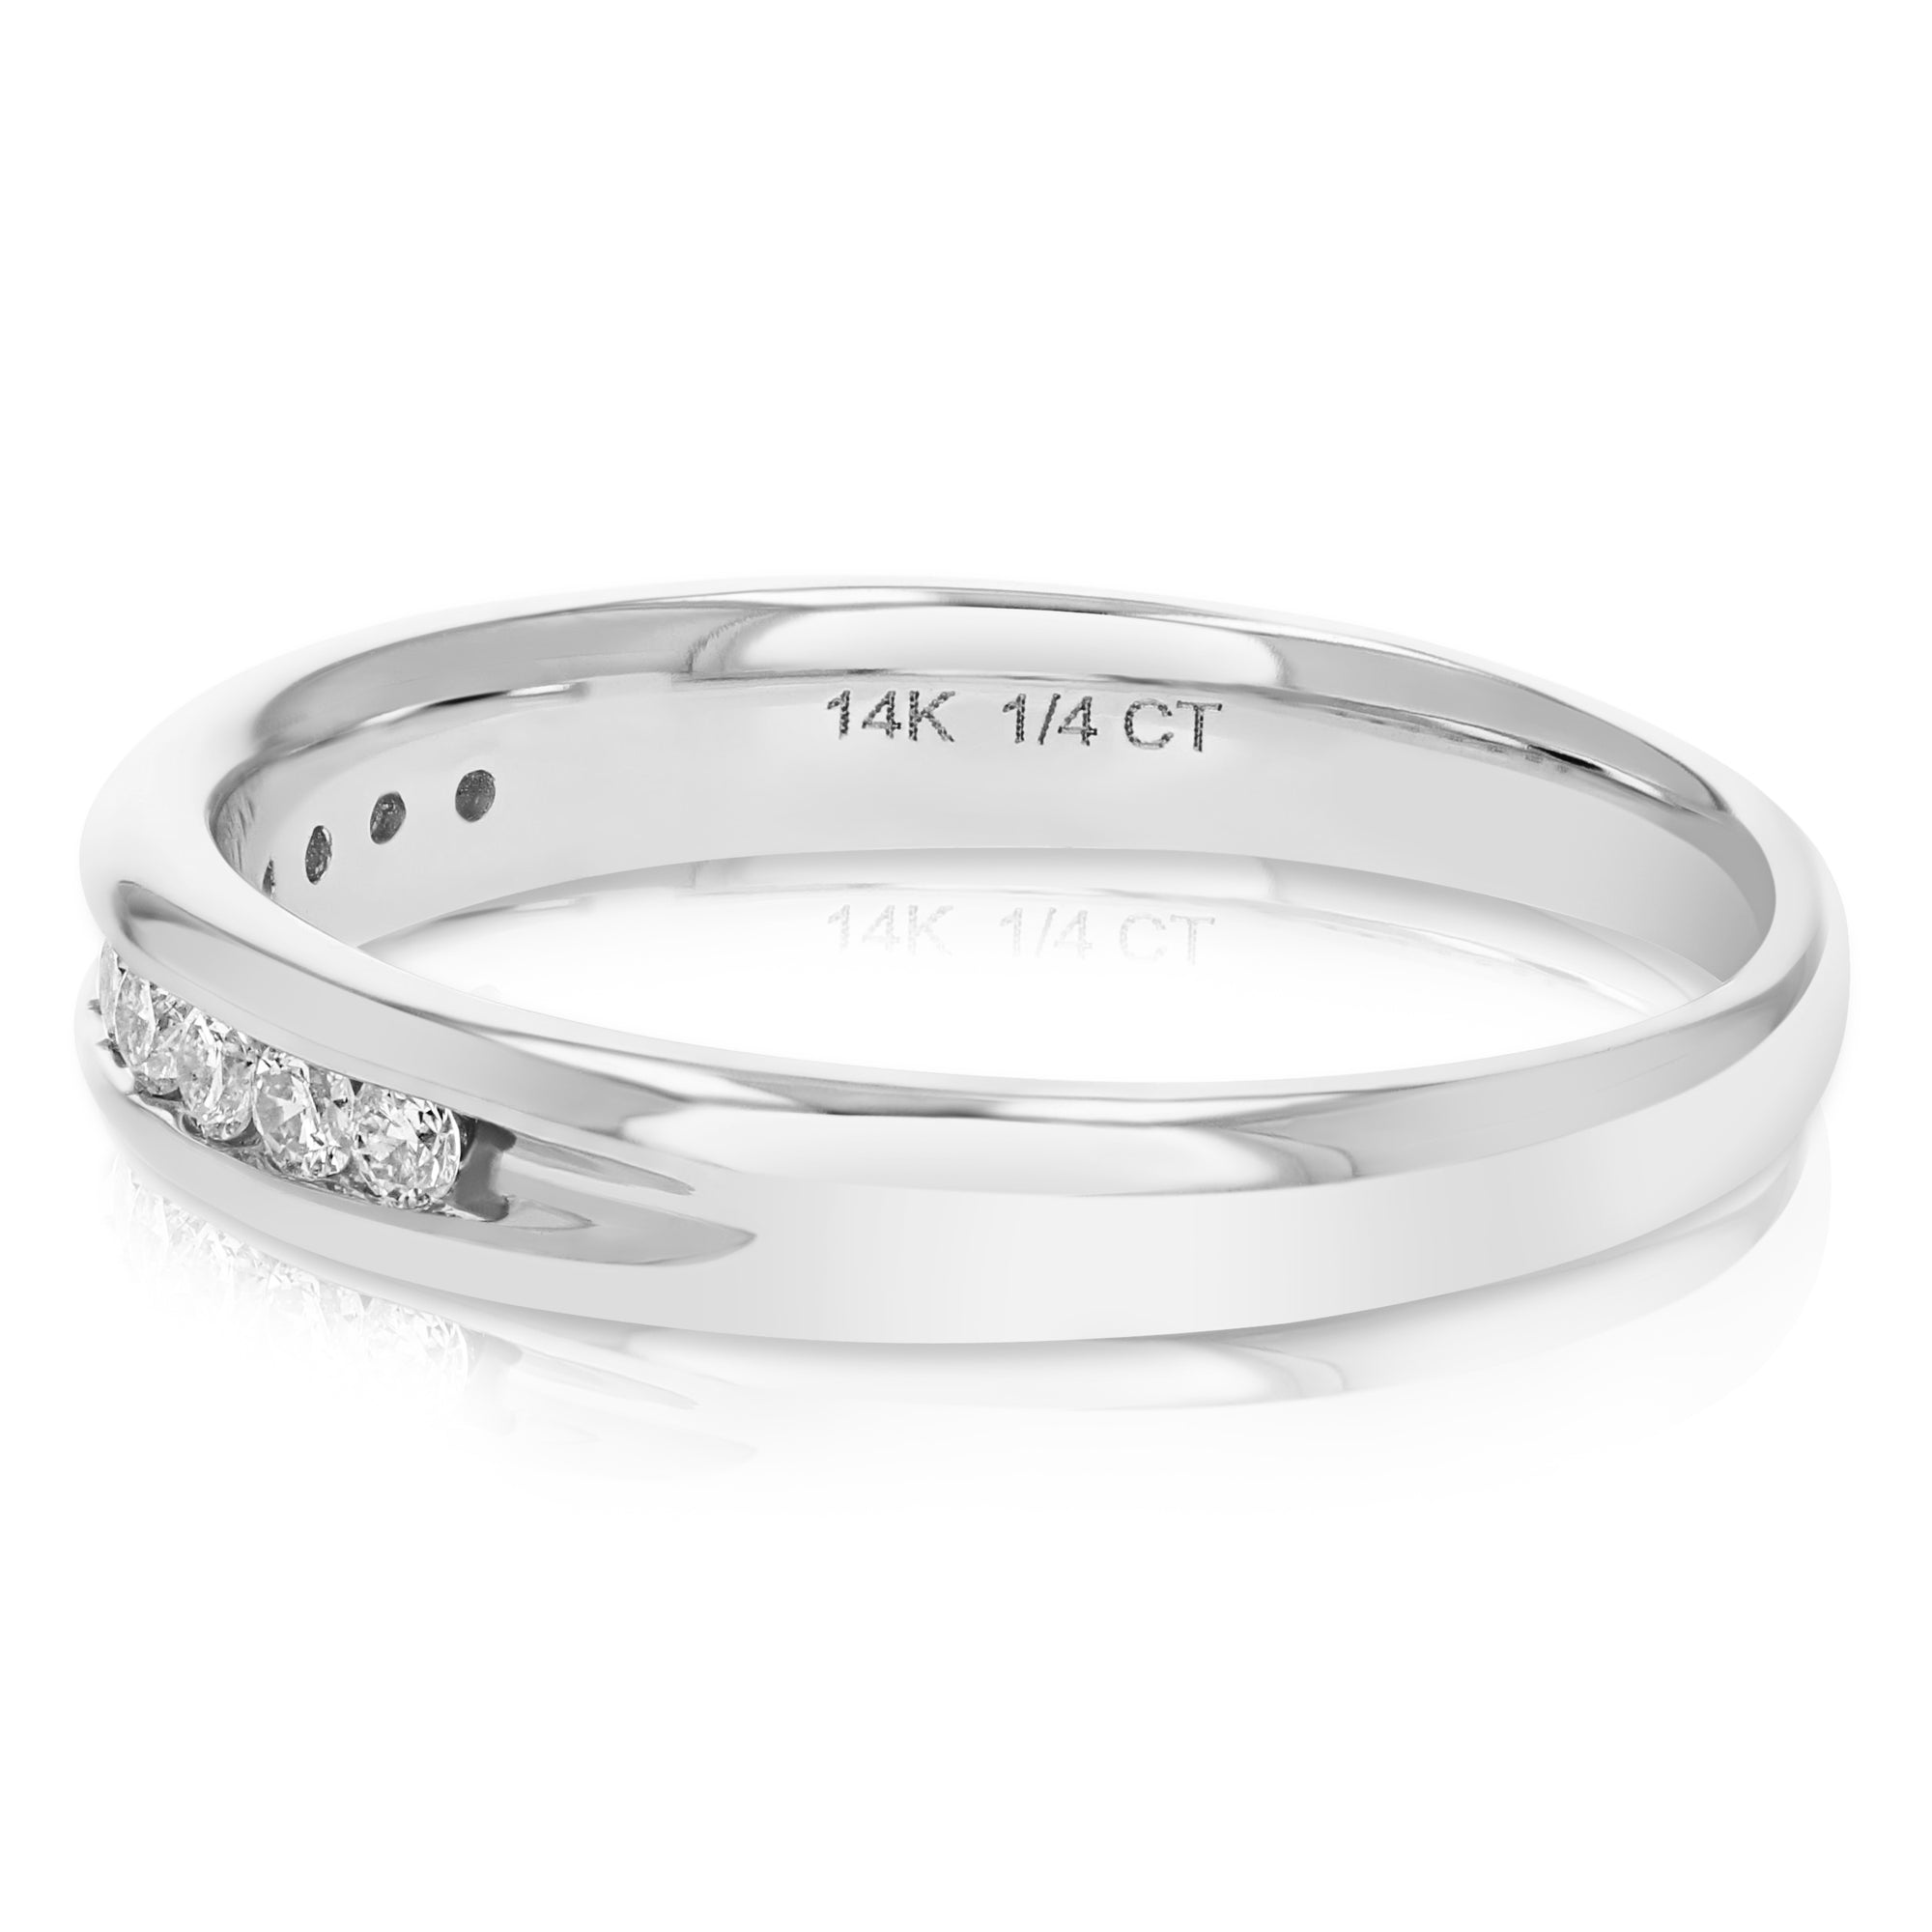 1/4 cttw Diamond Wedding Band for Women, Comfort Fit Diamond Wedding Band in 14K White Gold Channel Set Ring, Size 4.5-10